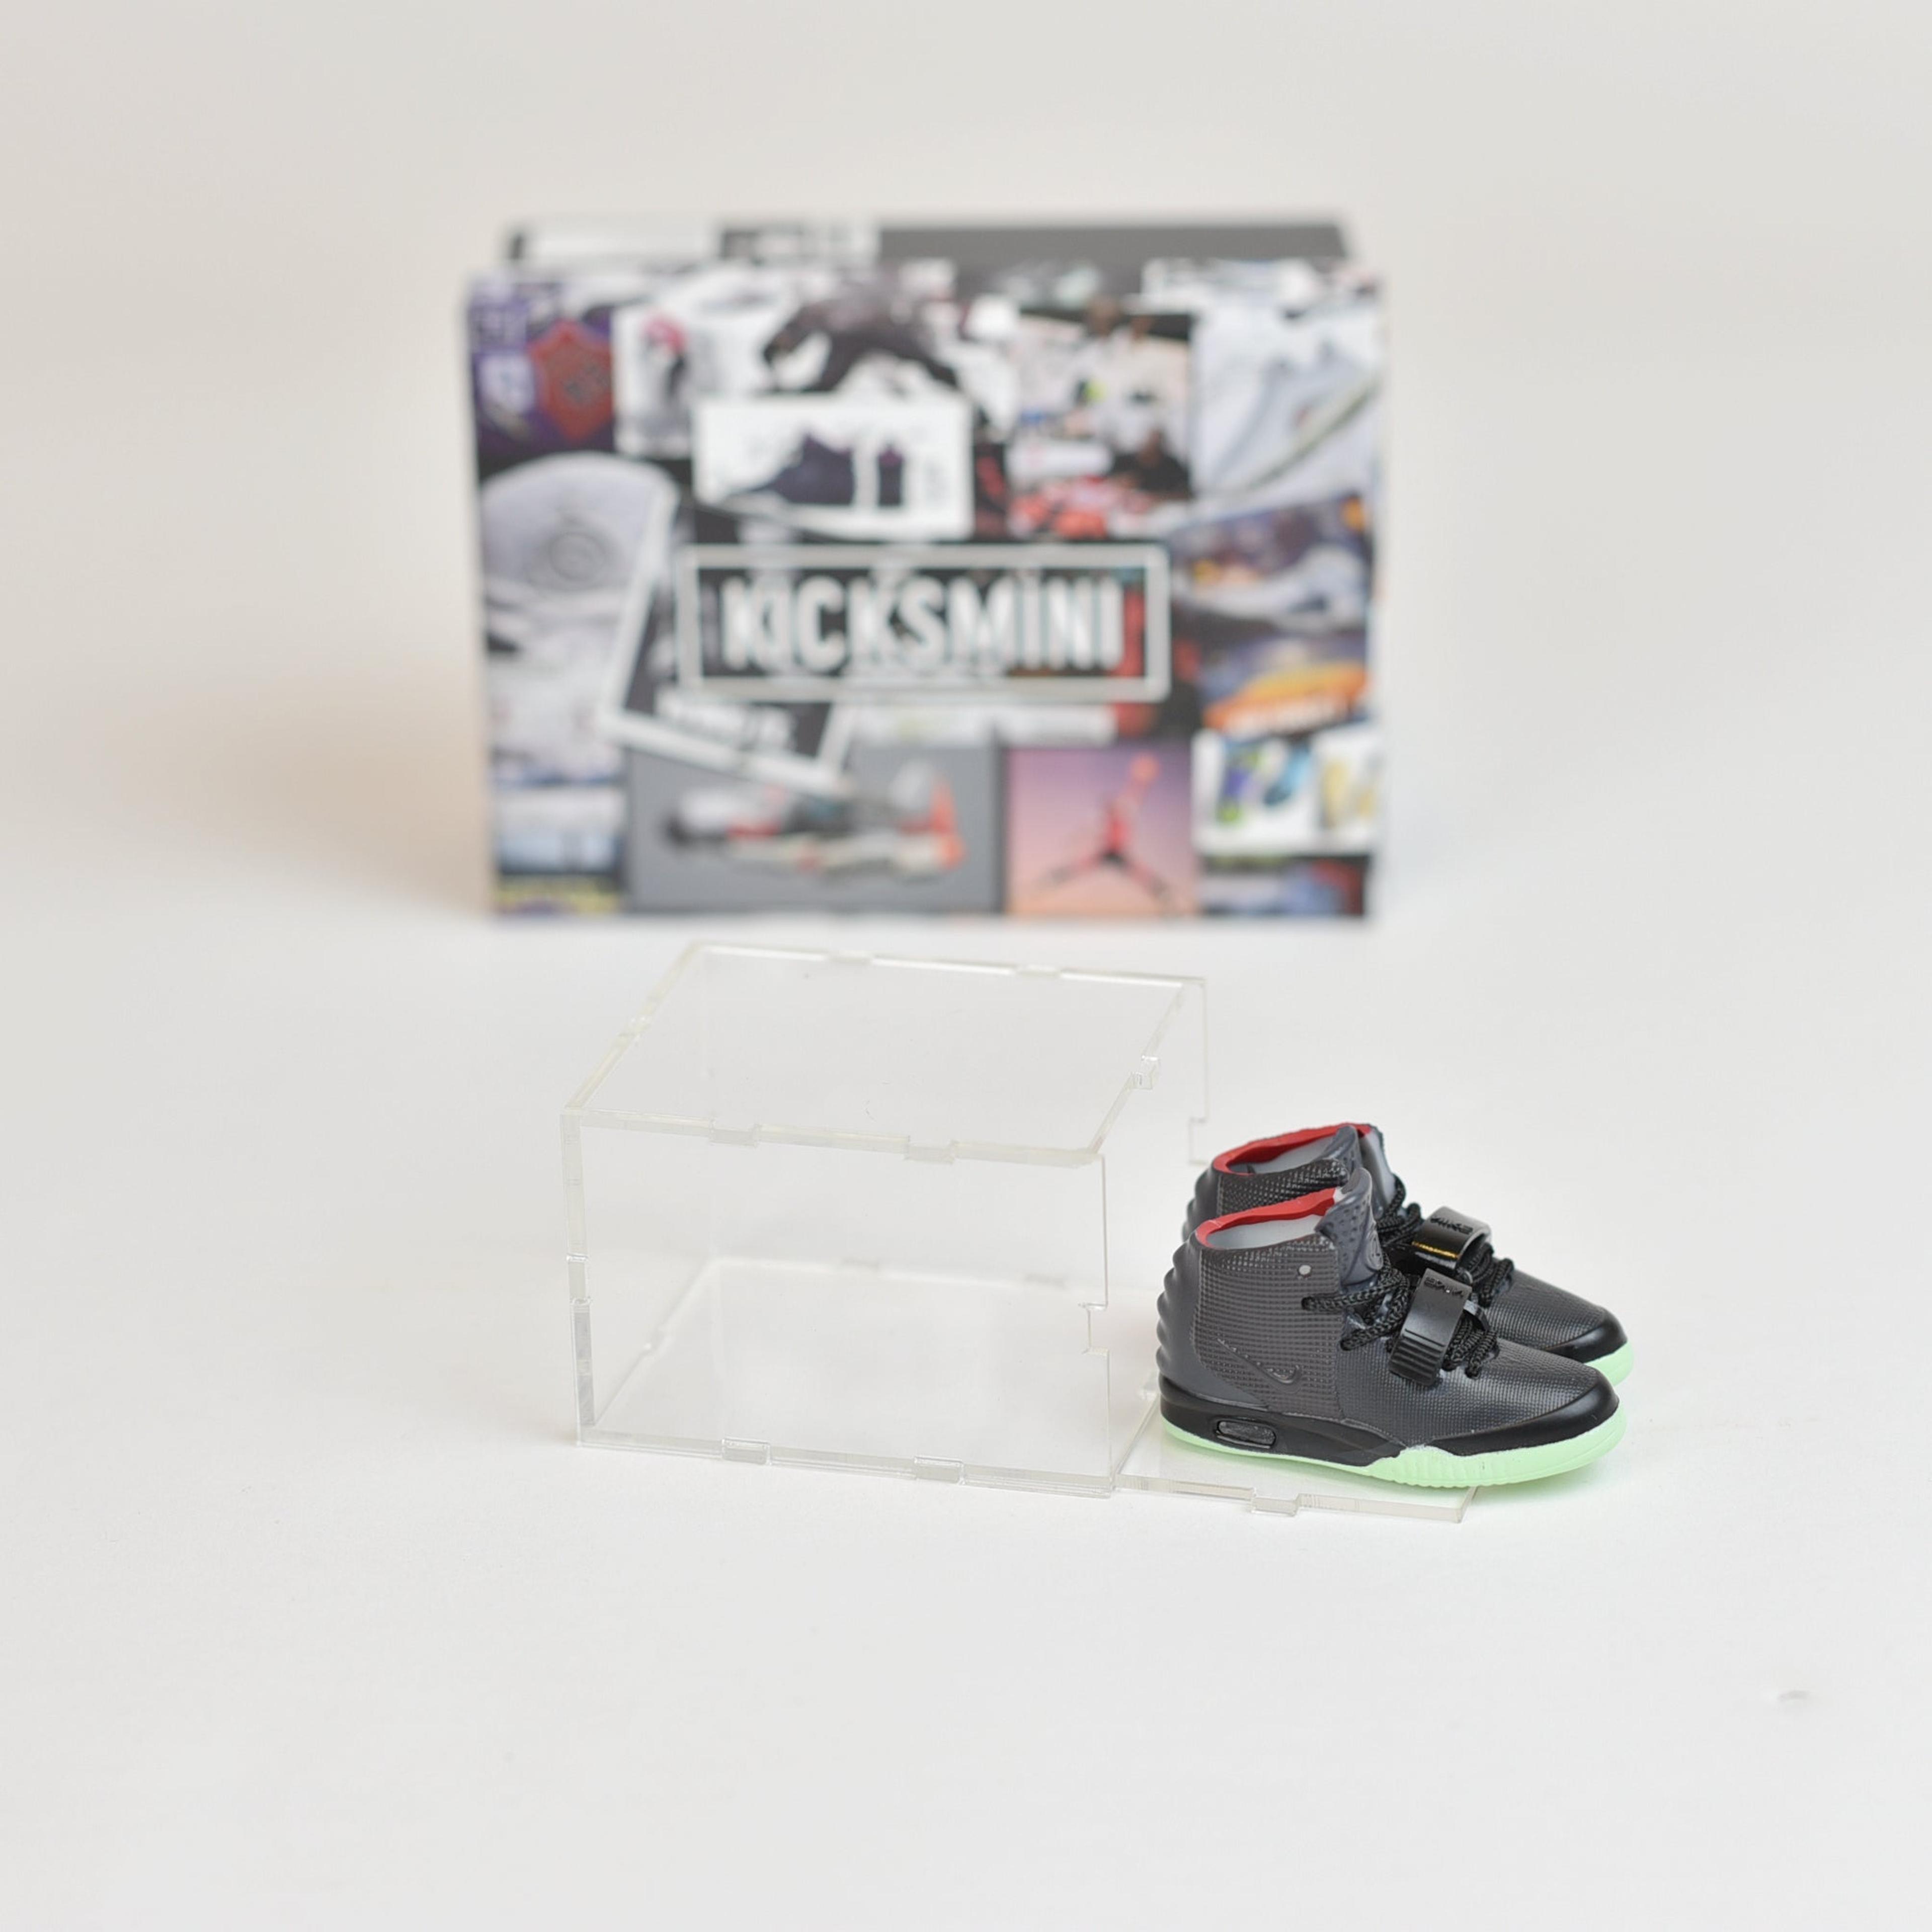 Alternate View 20 of Yeezy/NMD Mini Sneakers Collection with Display Case